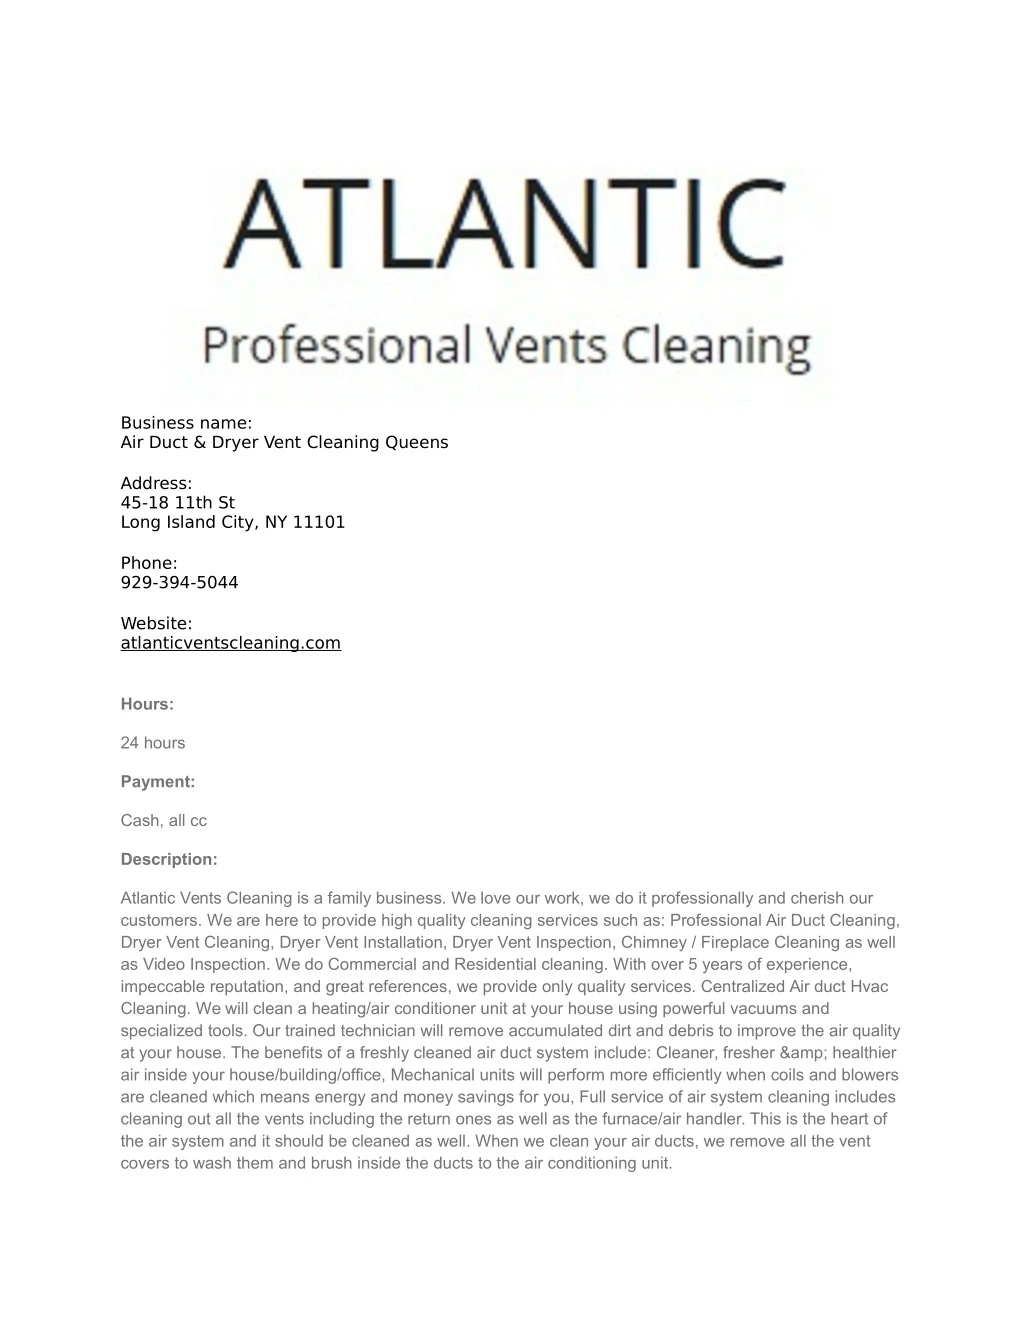 business name air duct dryer vent cleaning queens